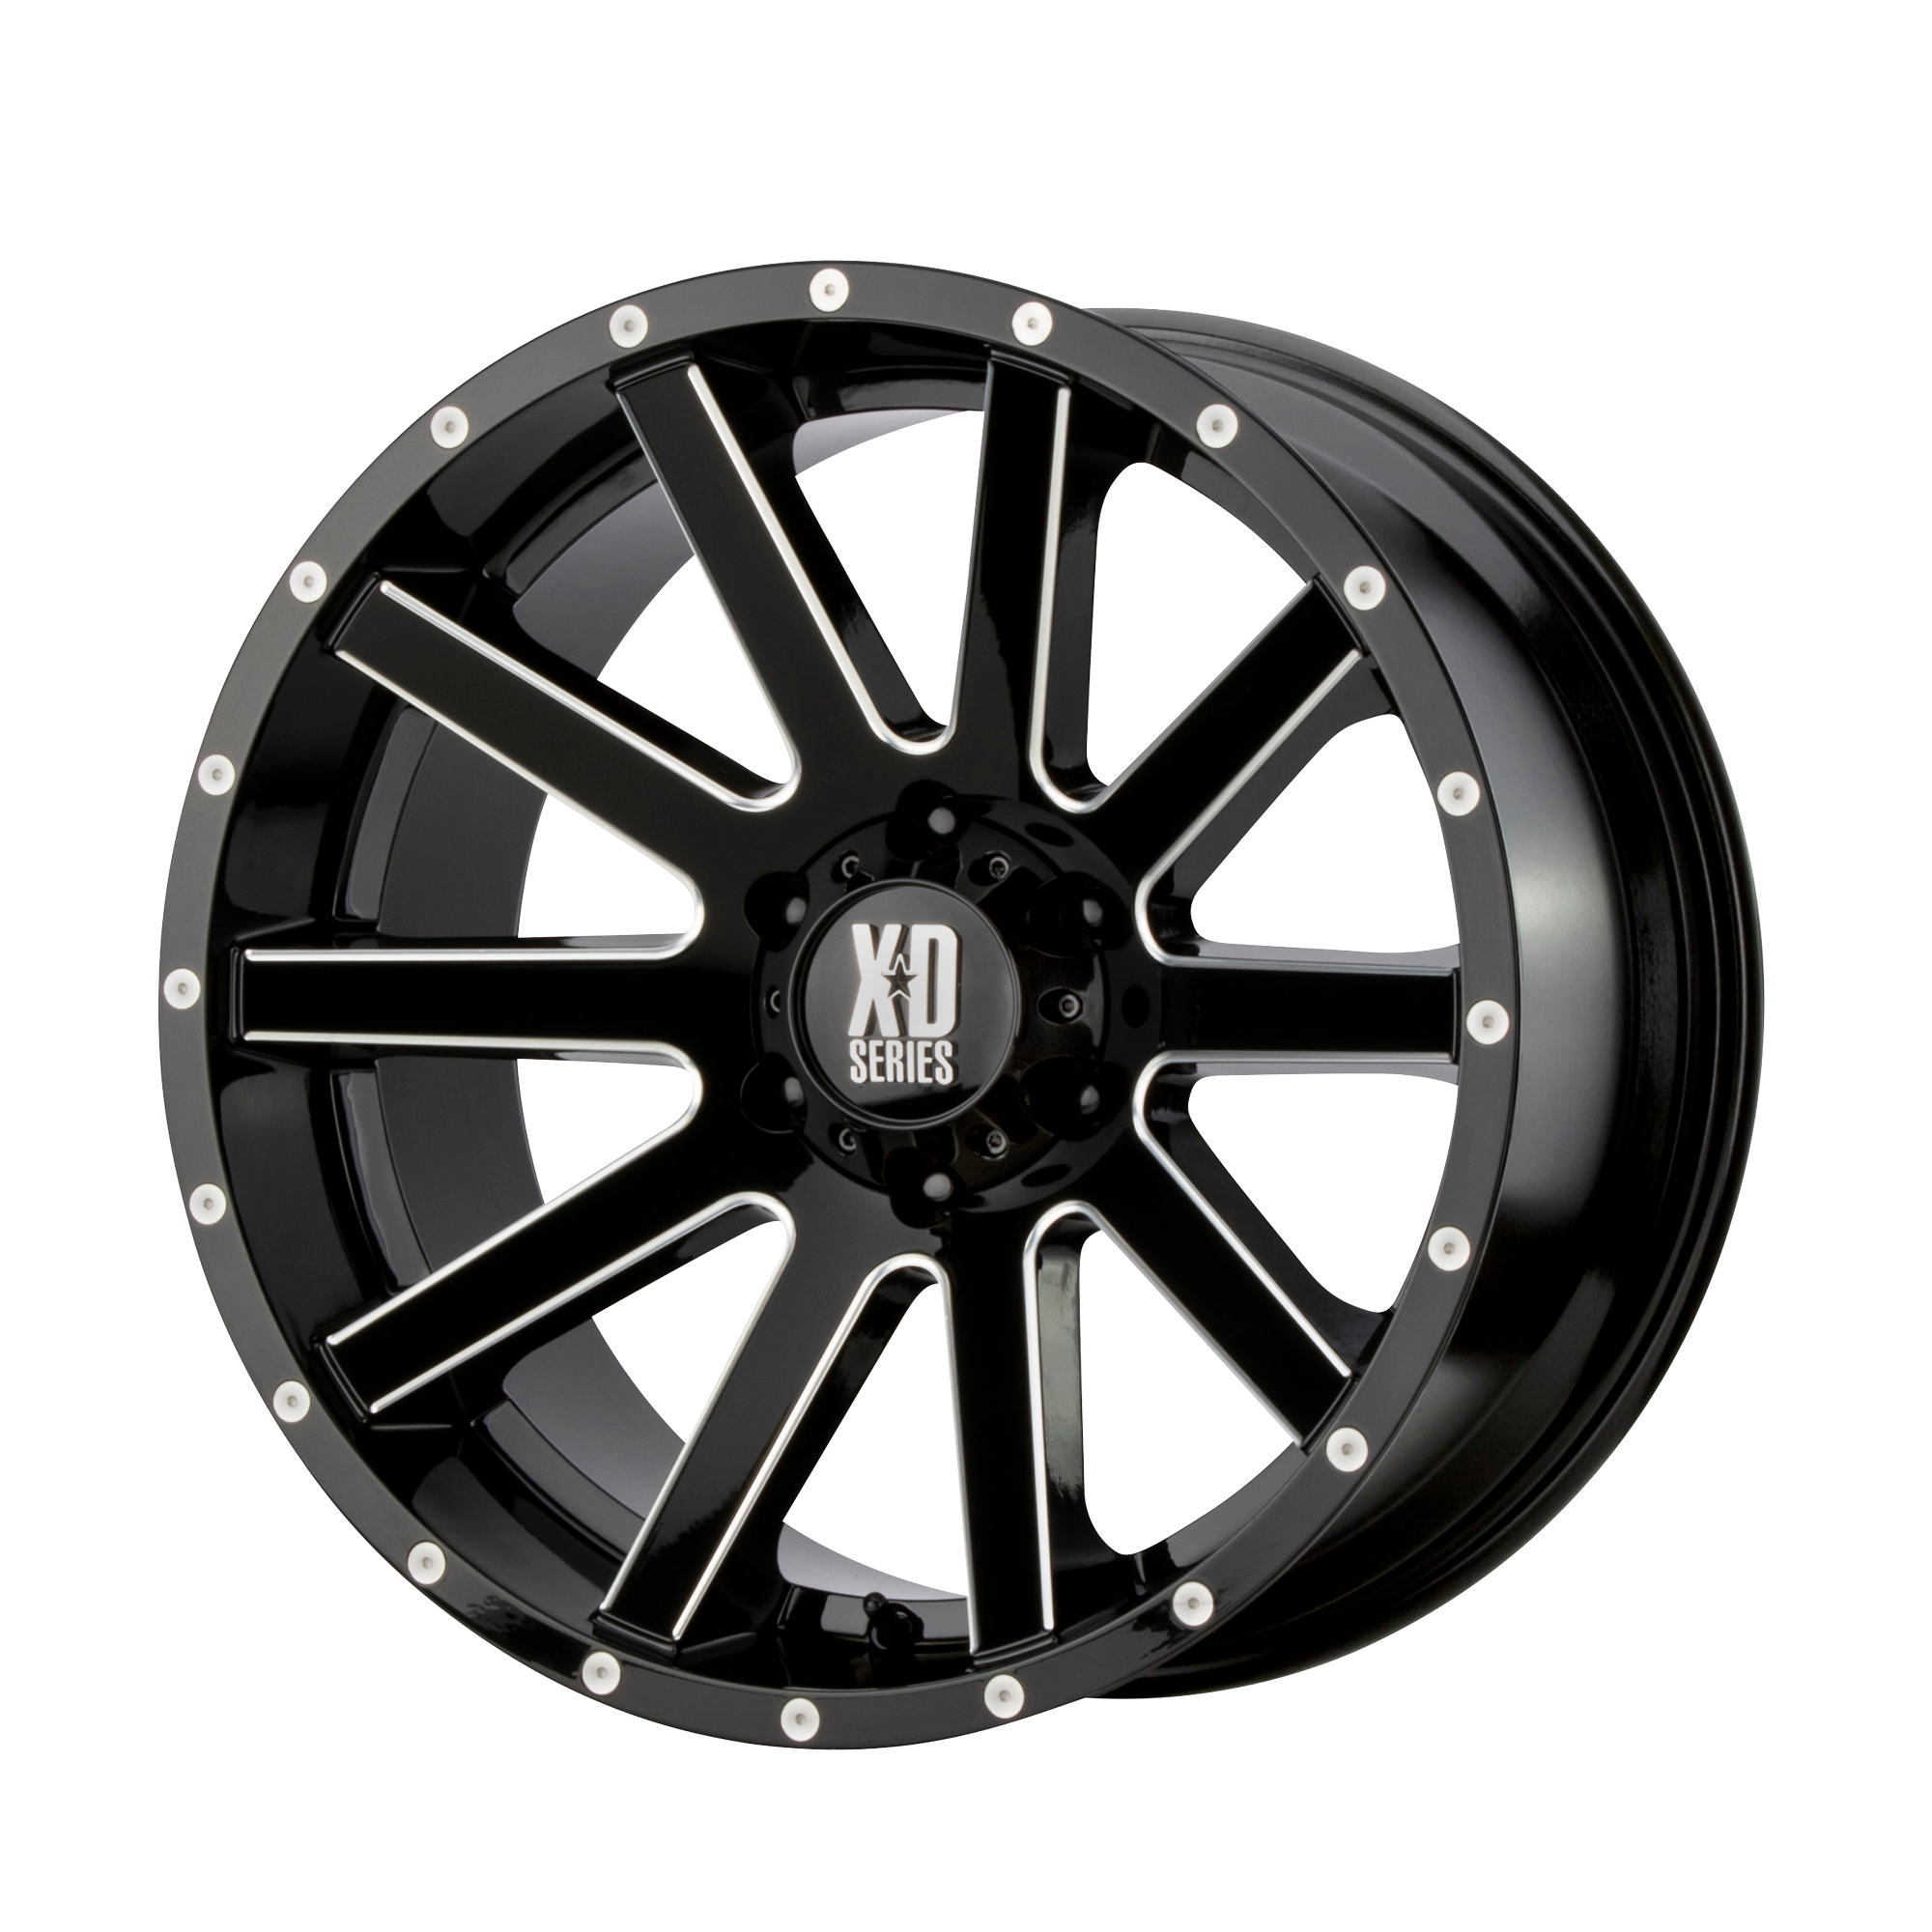 HEIST 17x8 5x127.00 GLOSS BLACK MILLED (35 mm) - Tires and Engine Performance